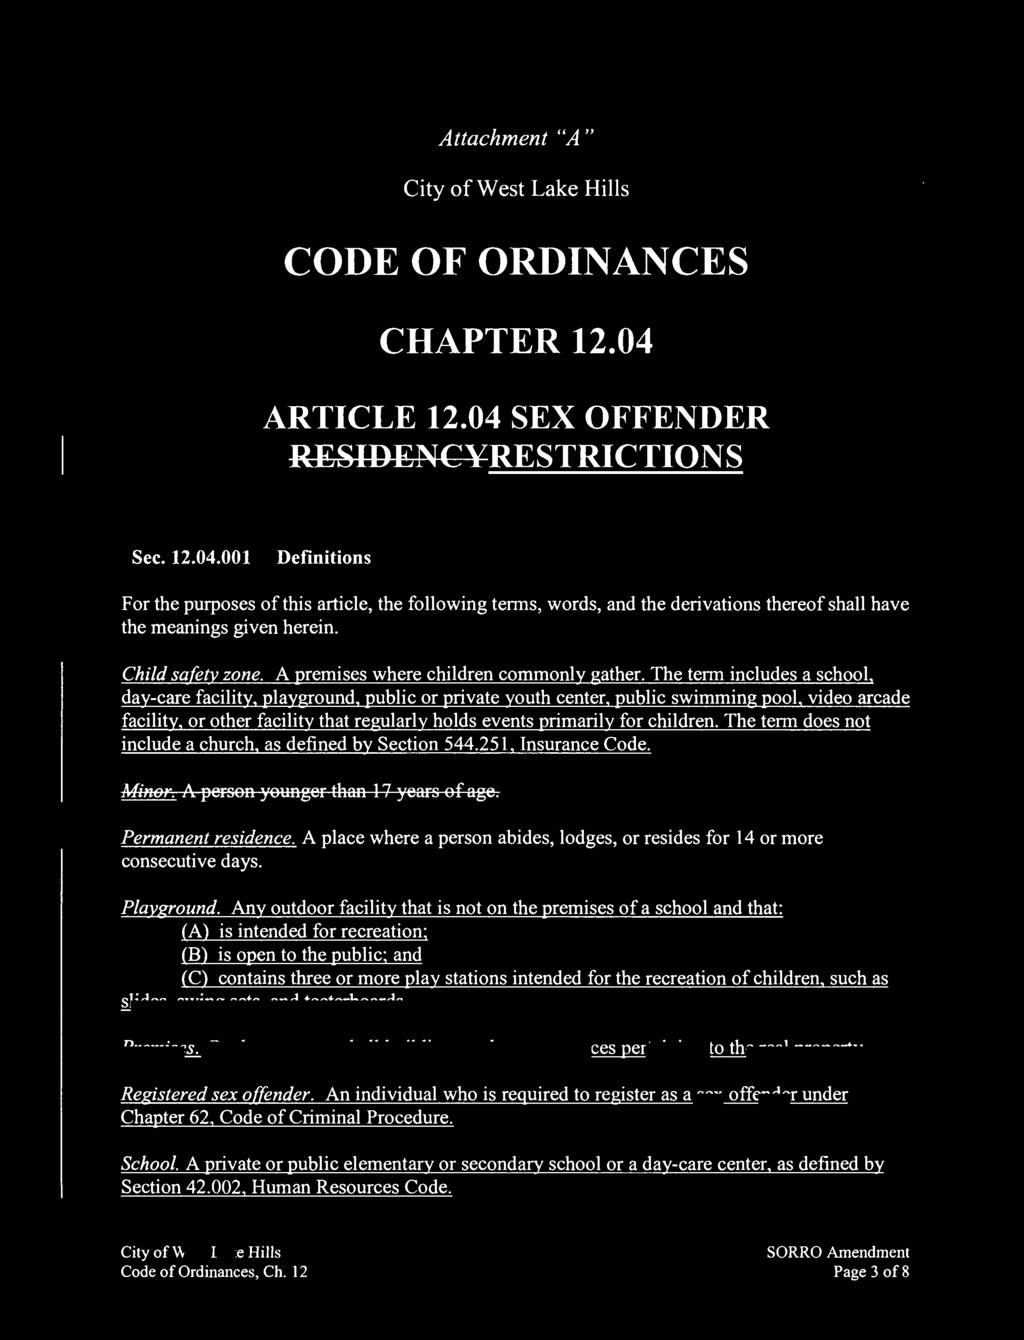 Attachment "A " CODE OF ORDINANCES CHAPTER 12.04 ARTICLE 12.04 SEX OFFENDER RESIDENCYRESTRICTIONS Sec. 12.04.001 Definitions For the purposes of this articl e, the following terms, words, and the derivations thereof shall have the meanings given herein.